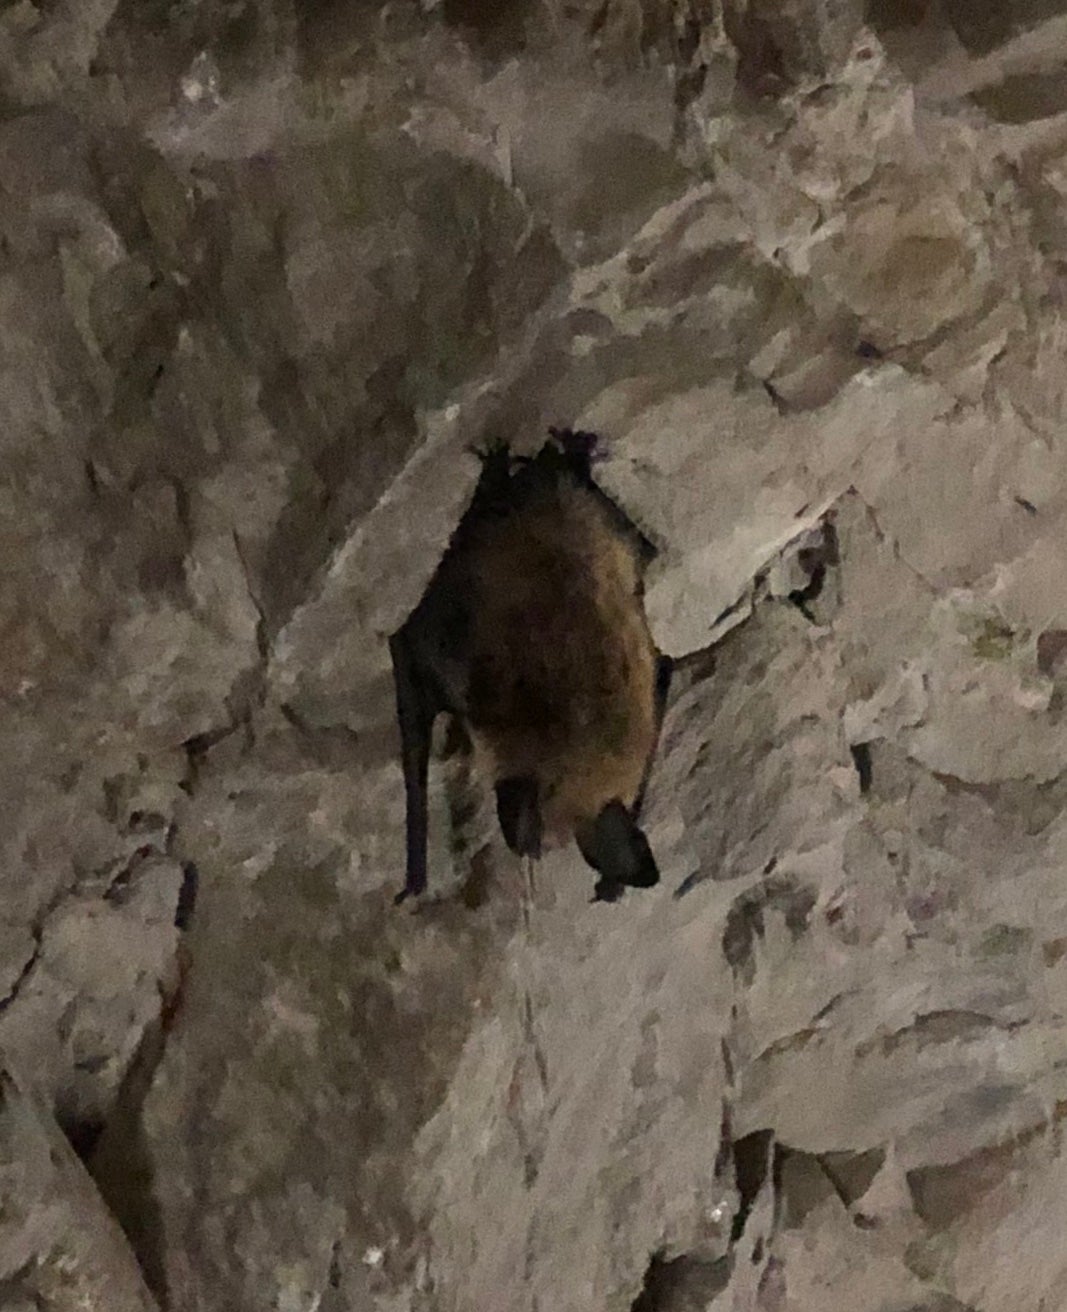 Little brown bat - close enough to touch but don't!